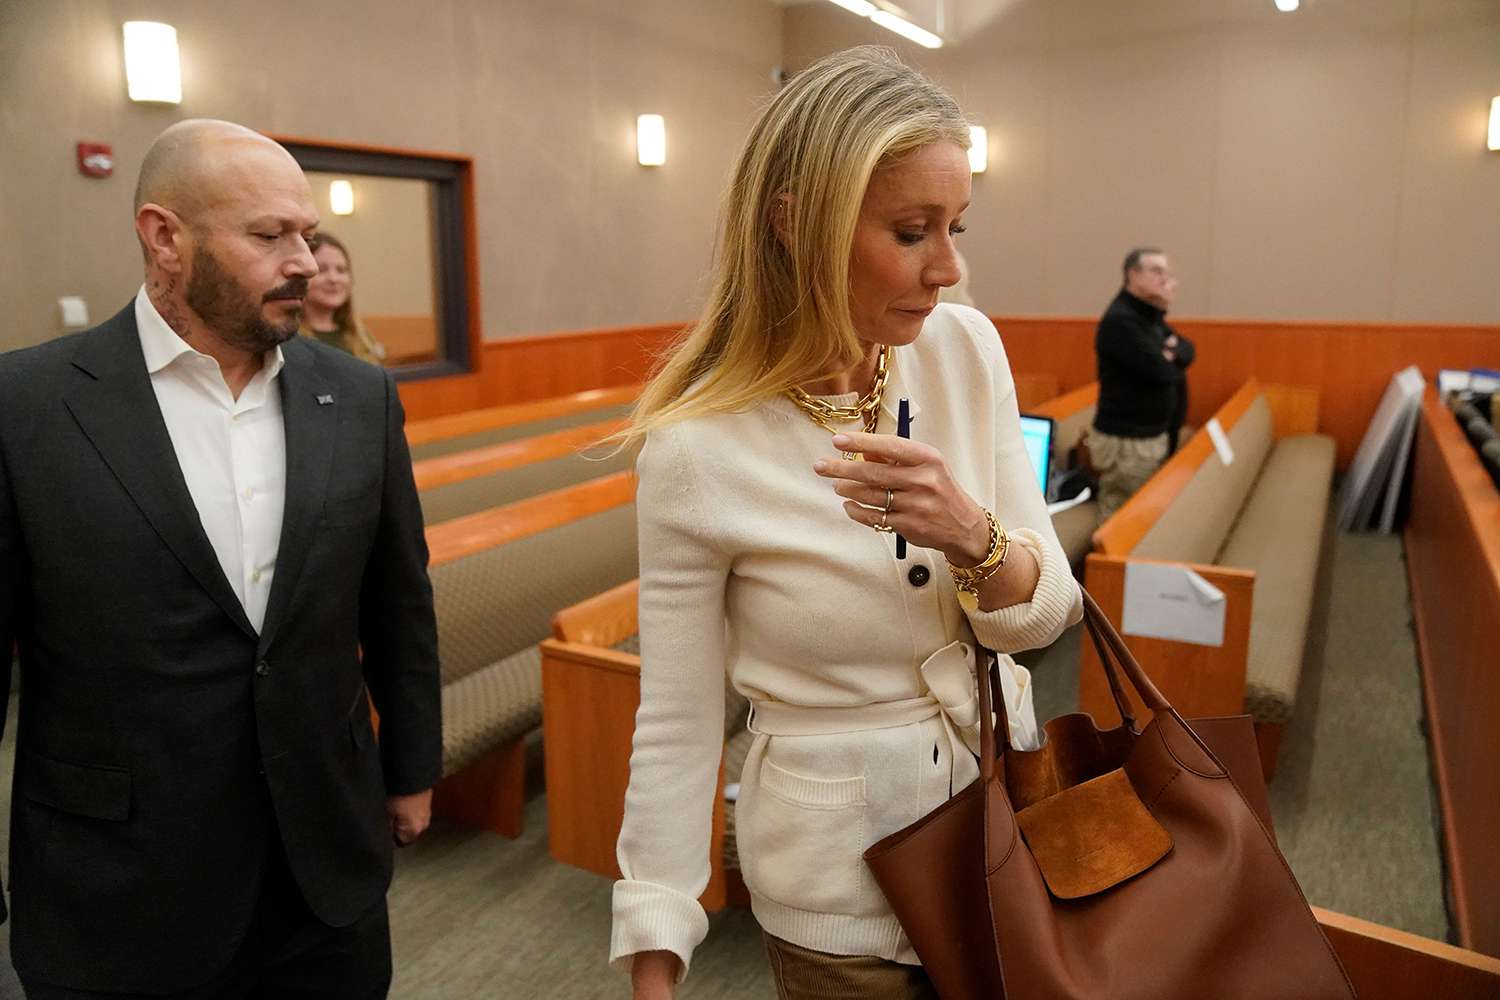 Actor Gwyneth Paltrow enters the courtroom, in Park City, Utah.